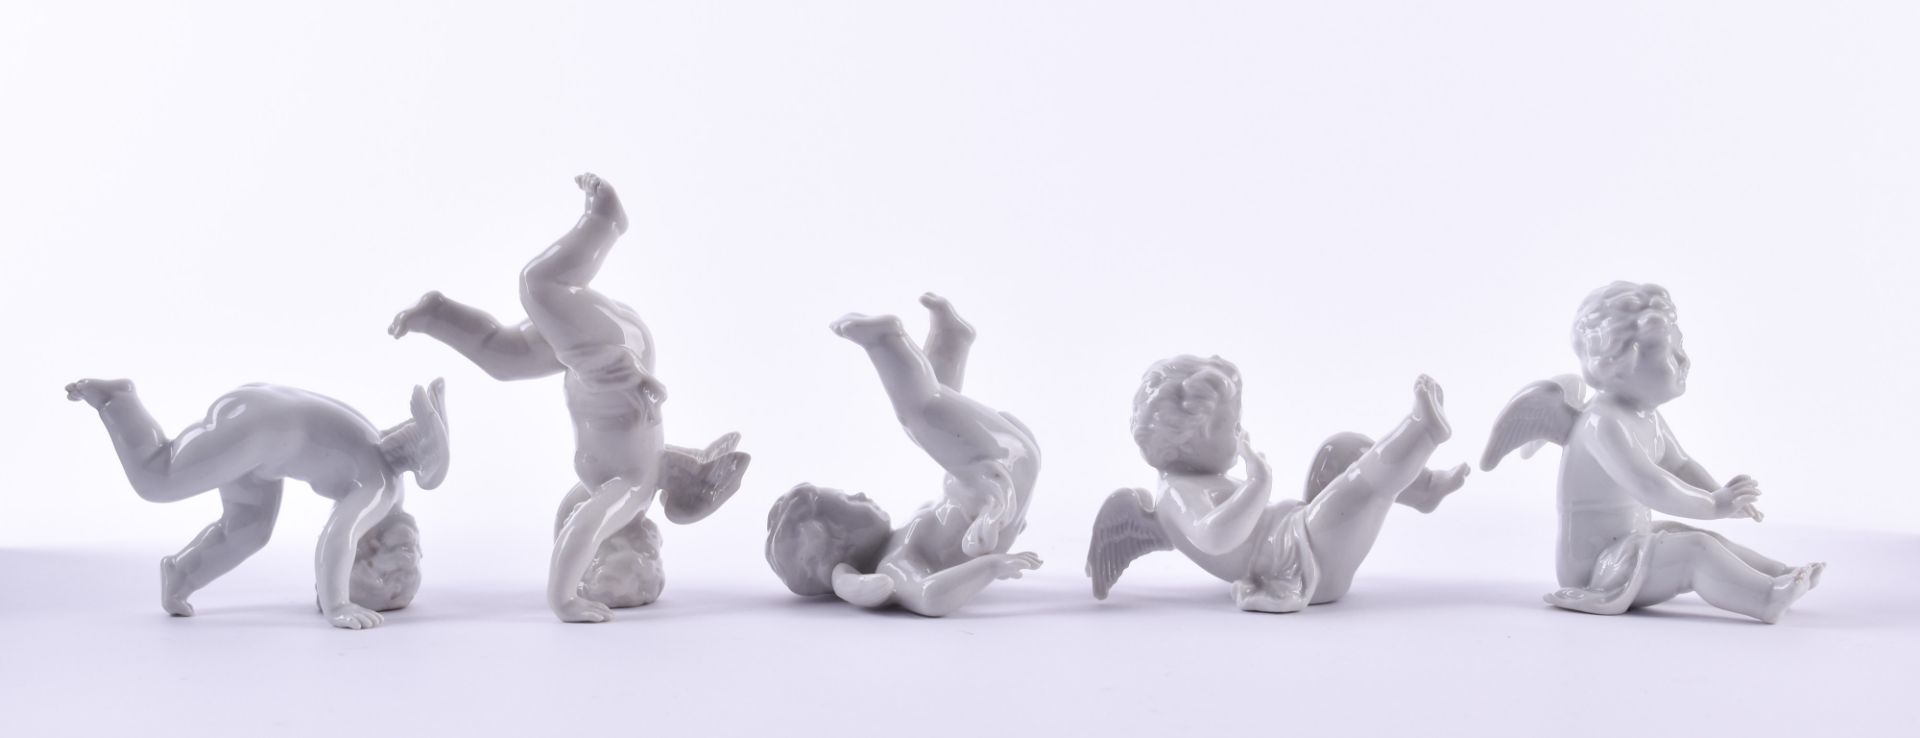 Porzellanfiguren, 20th centurywhite porcelain, the somersault in 5 phases, marked, height: from 5.